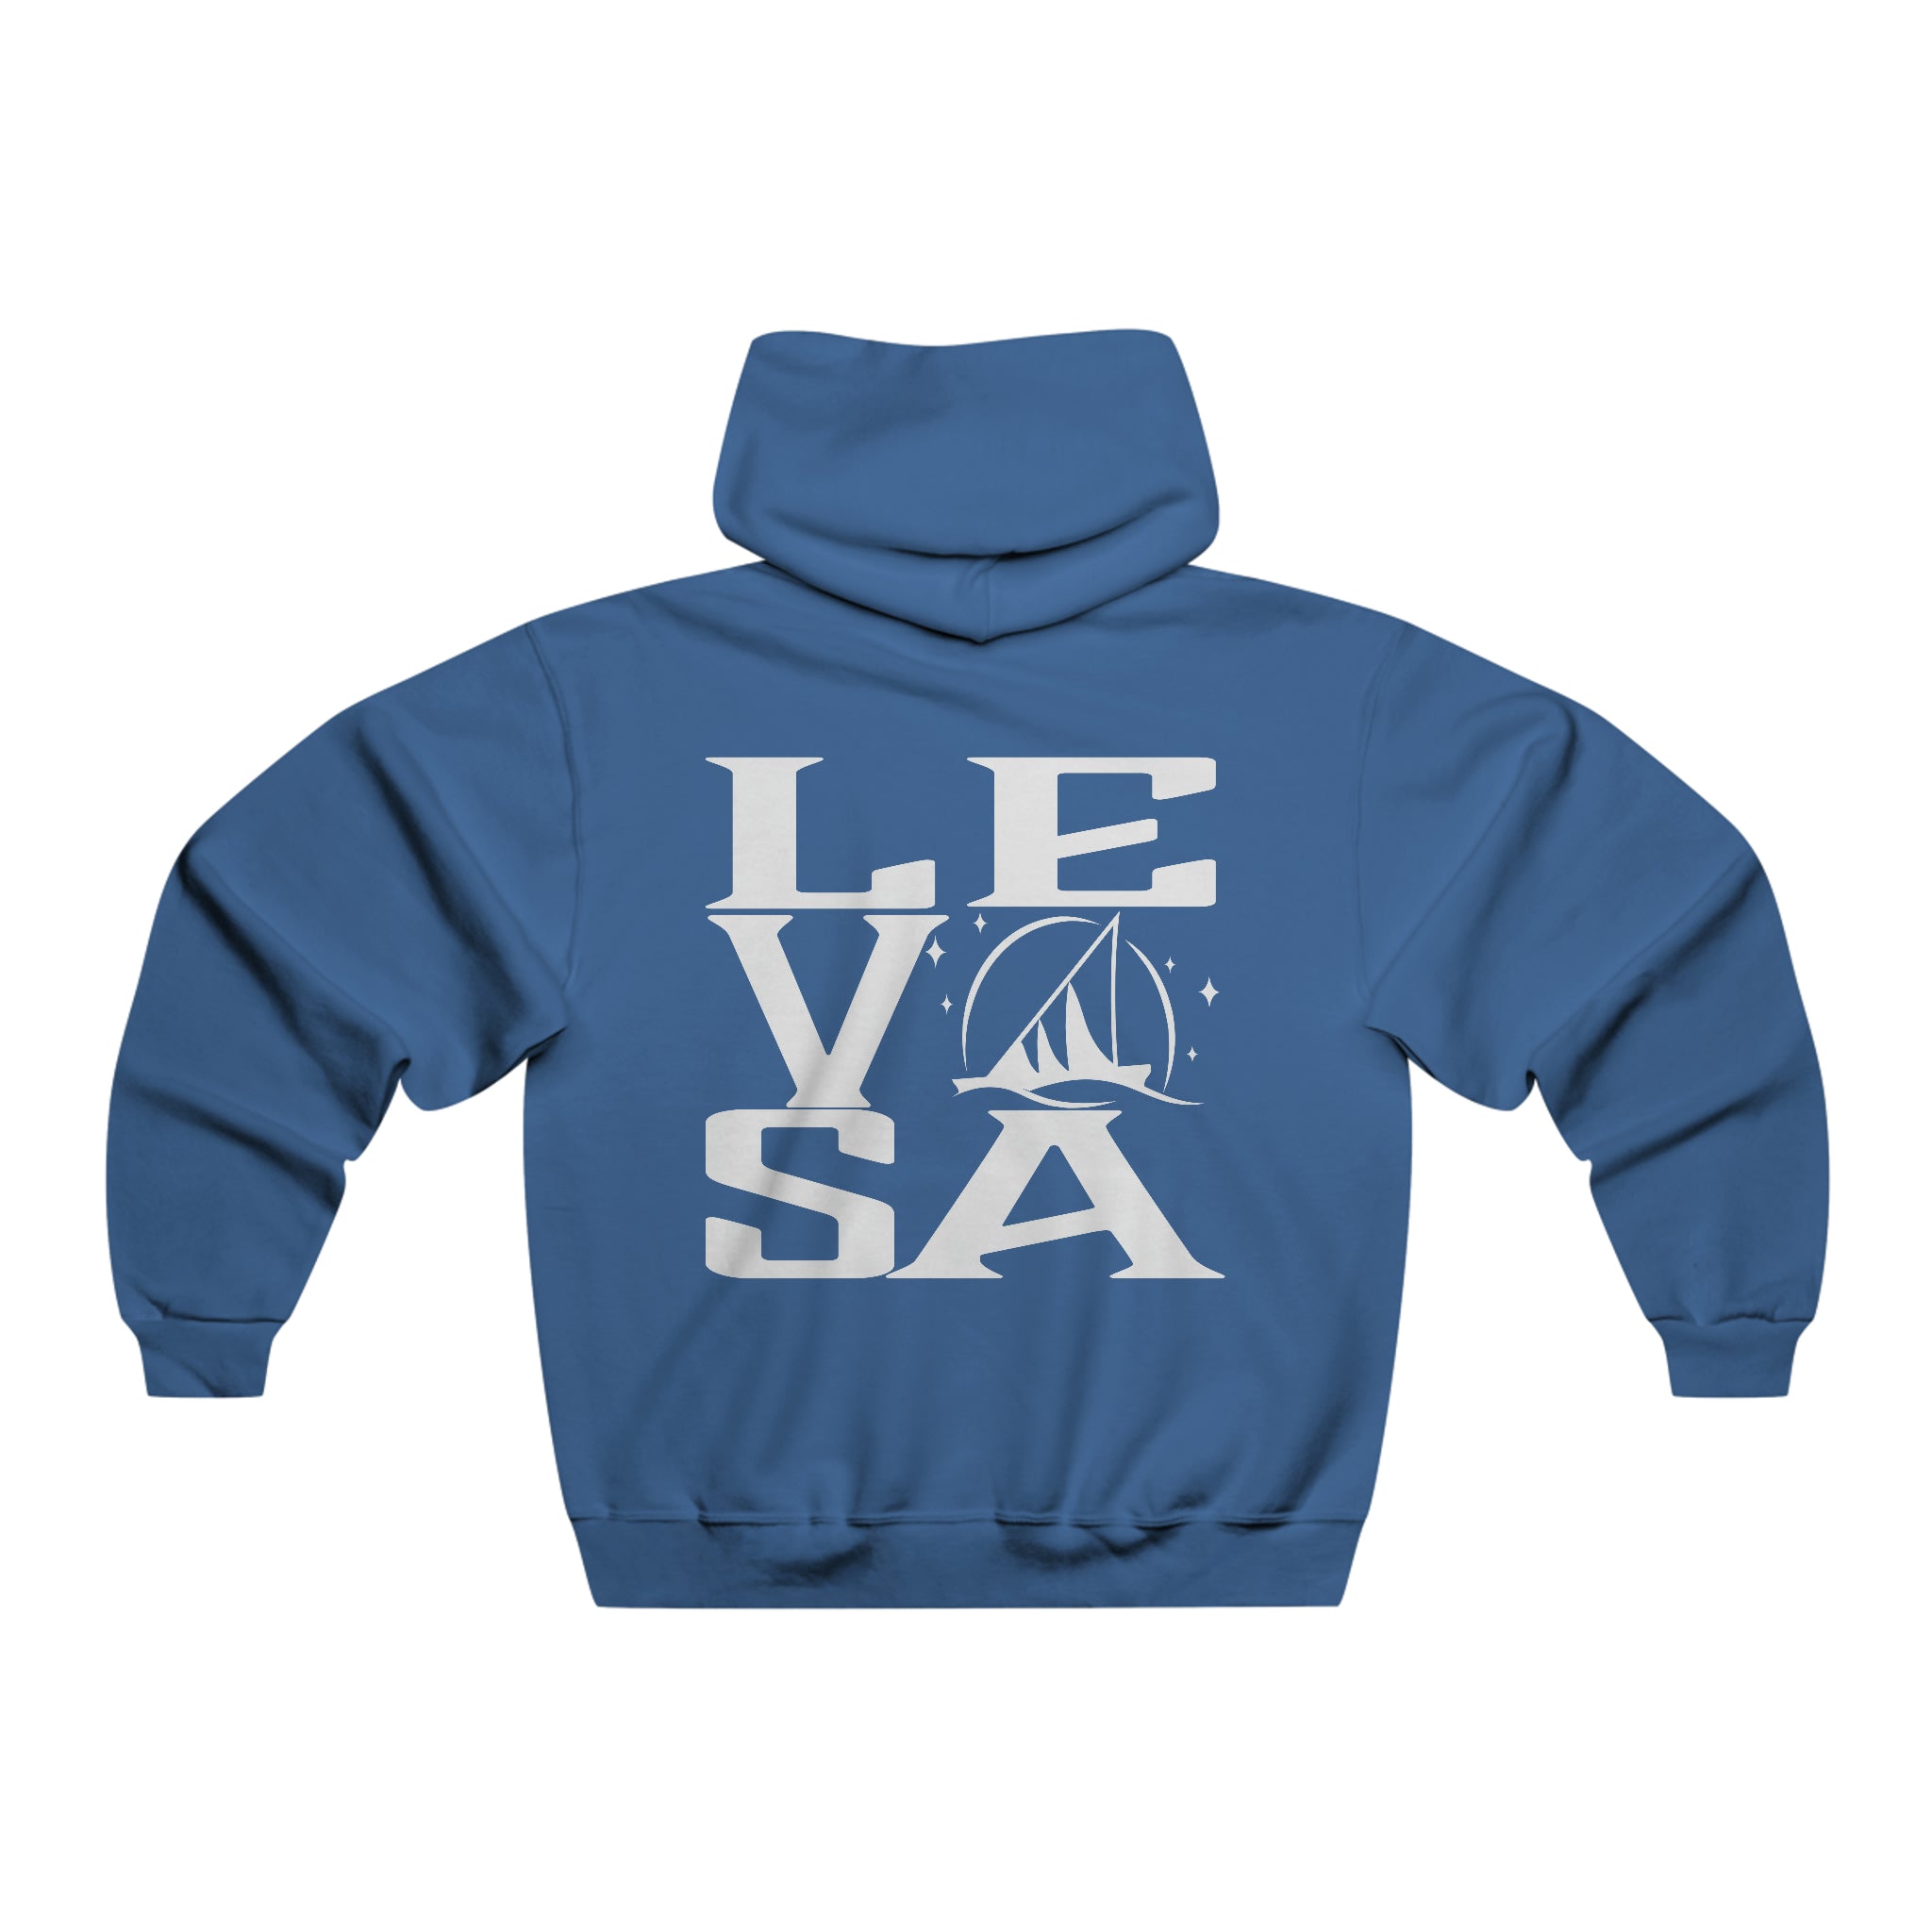 4 Federated States of Micronesia Hoodie